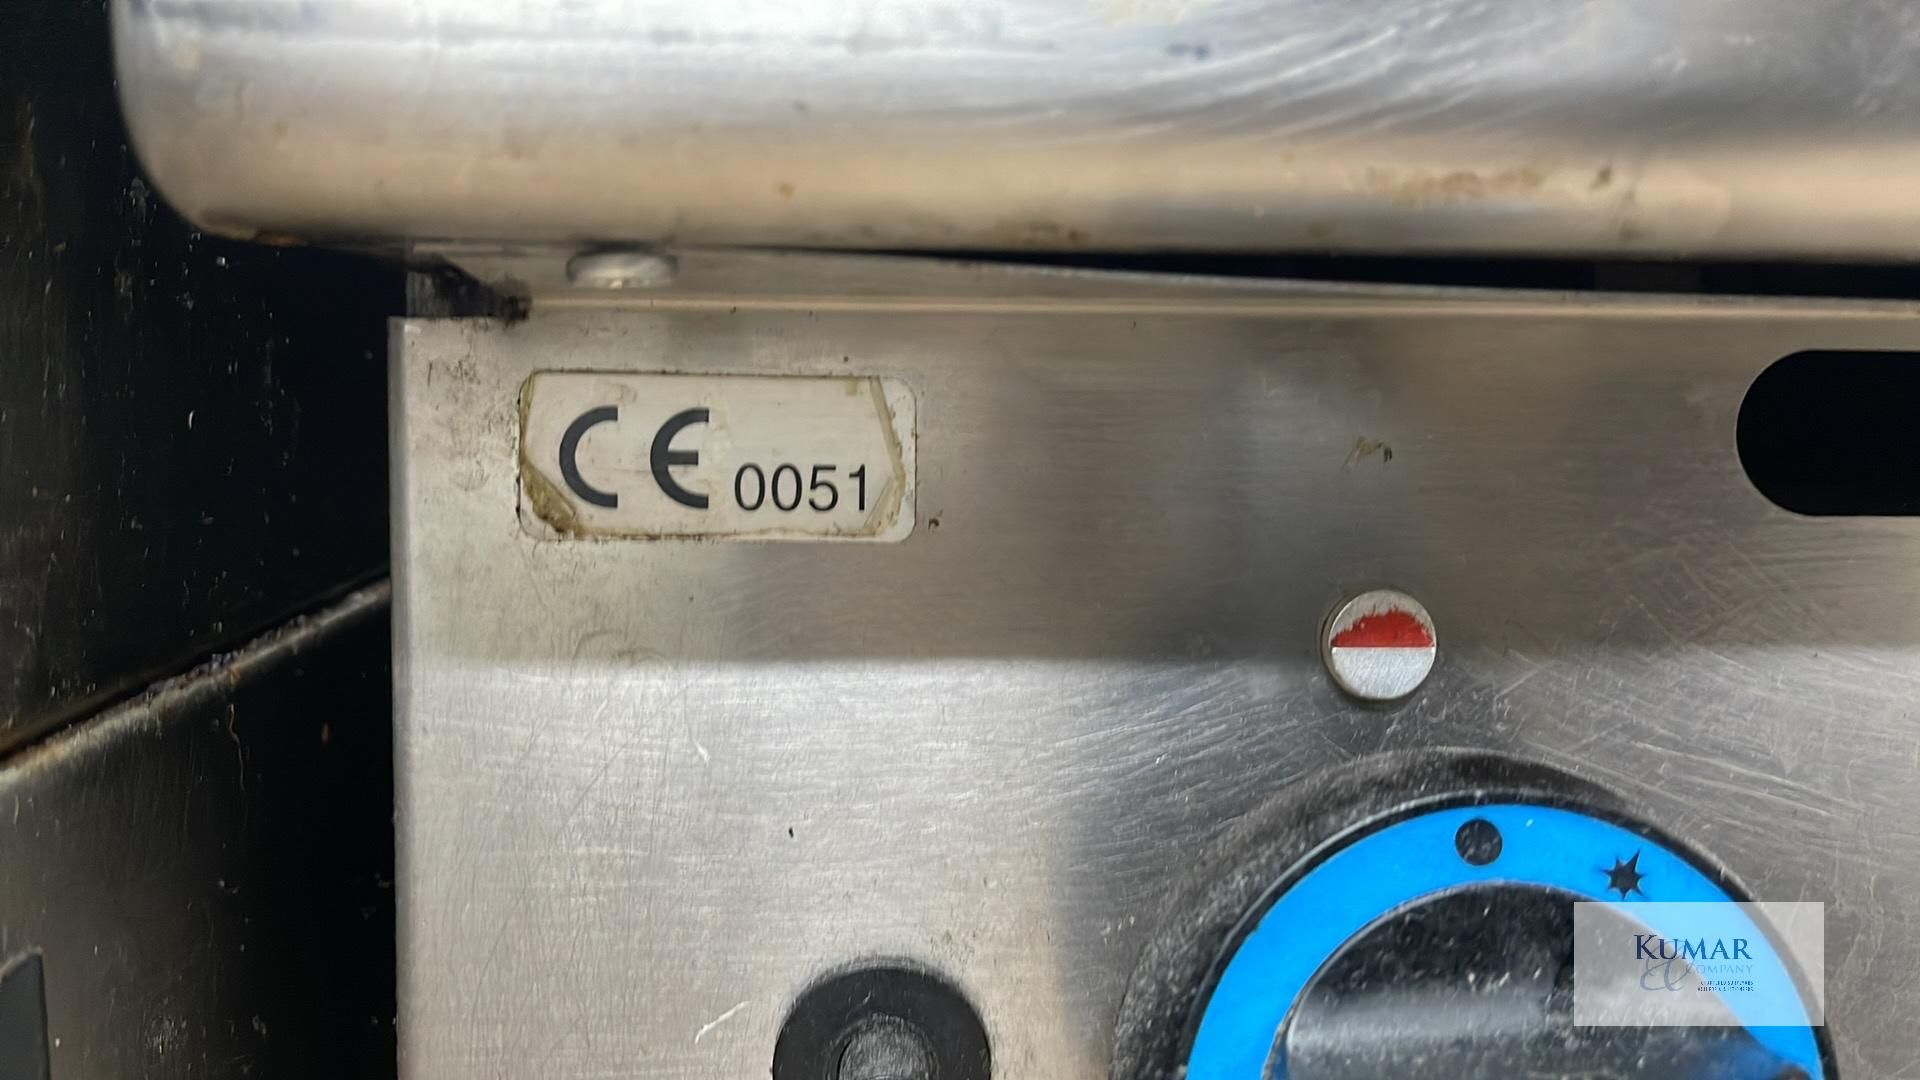 Make Unknown Stainless Steel Cook Top Griddle on Wheels - Believed to be purchased in 2019 - Image 5 of 5